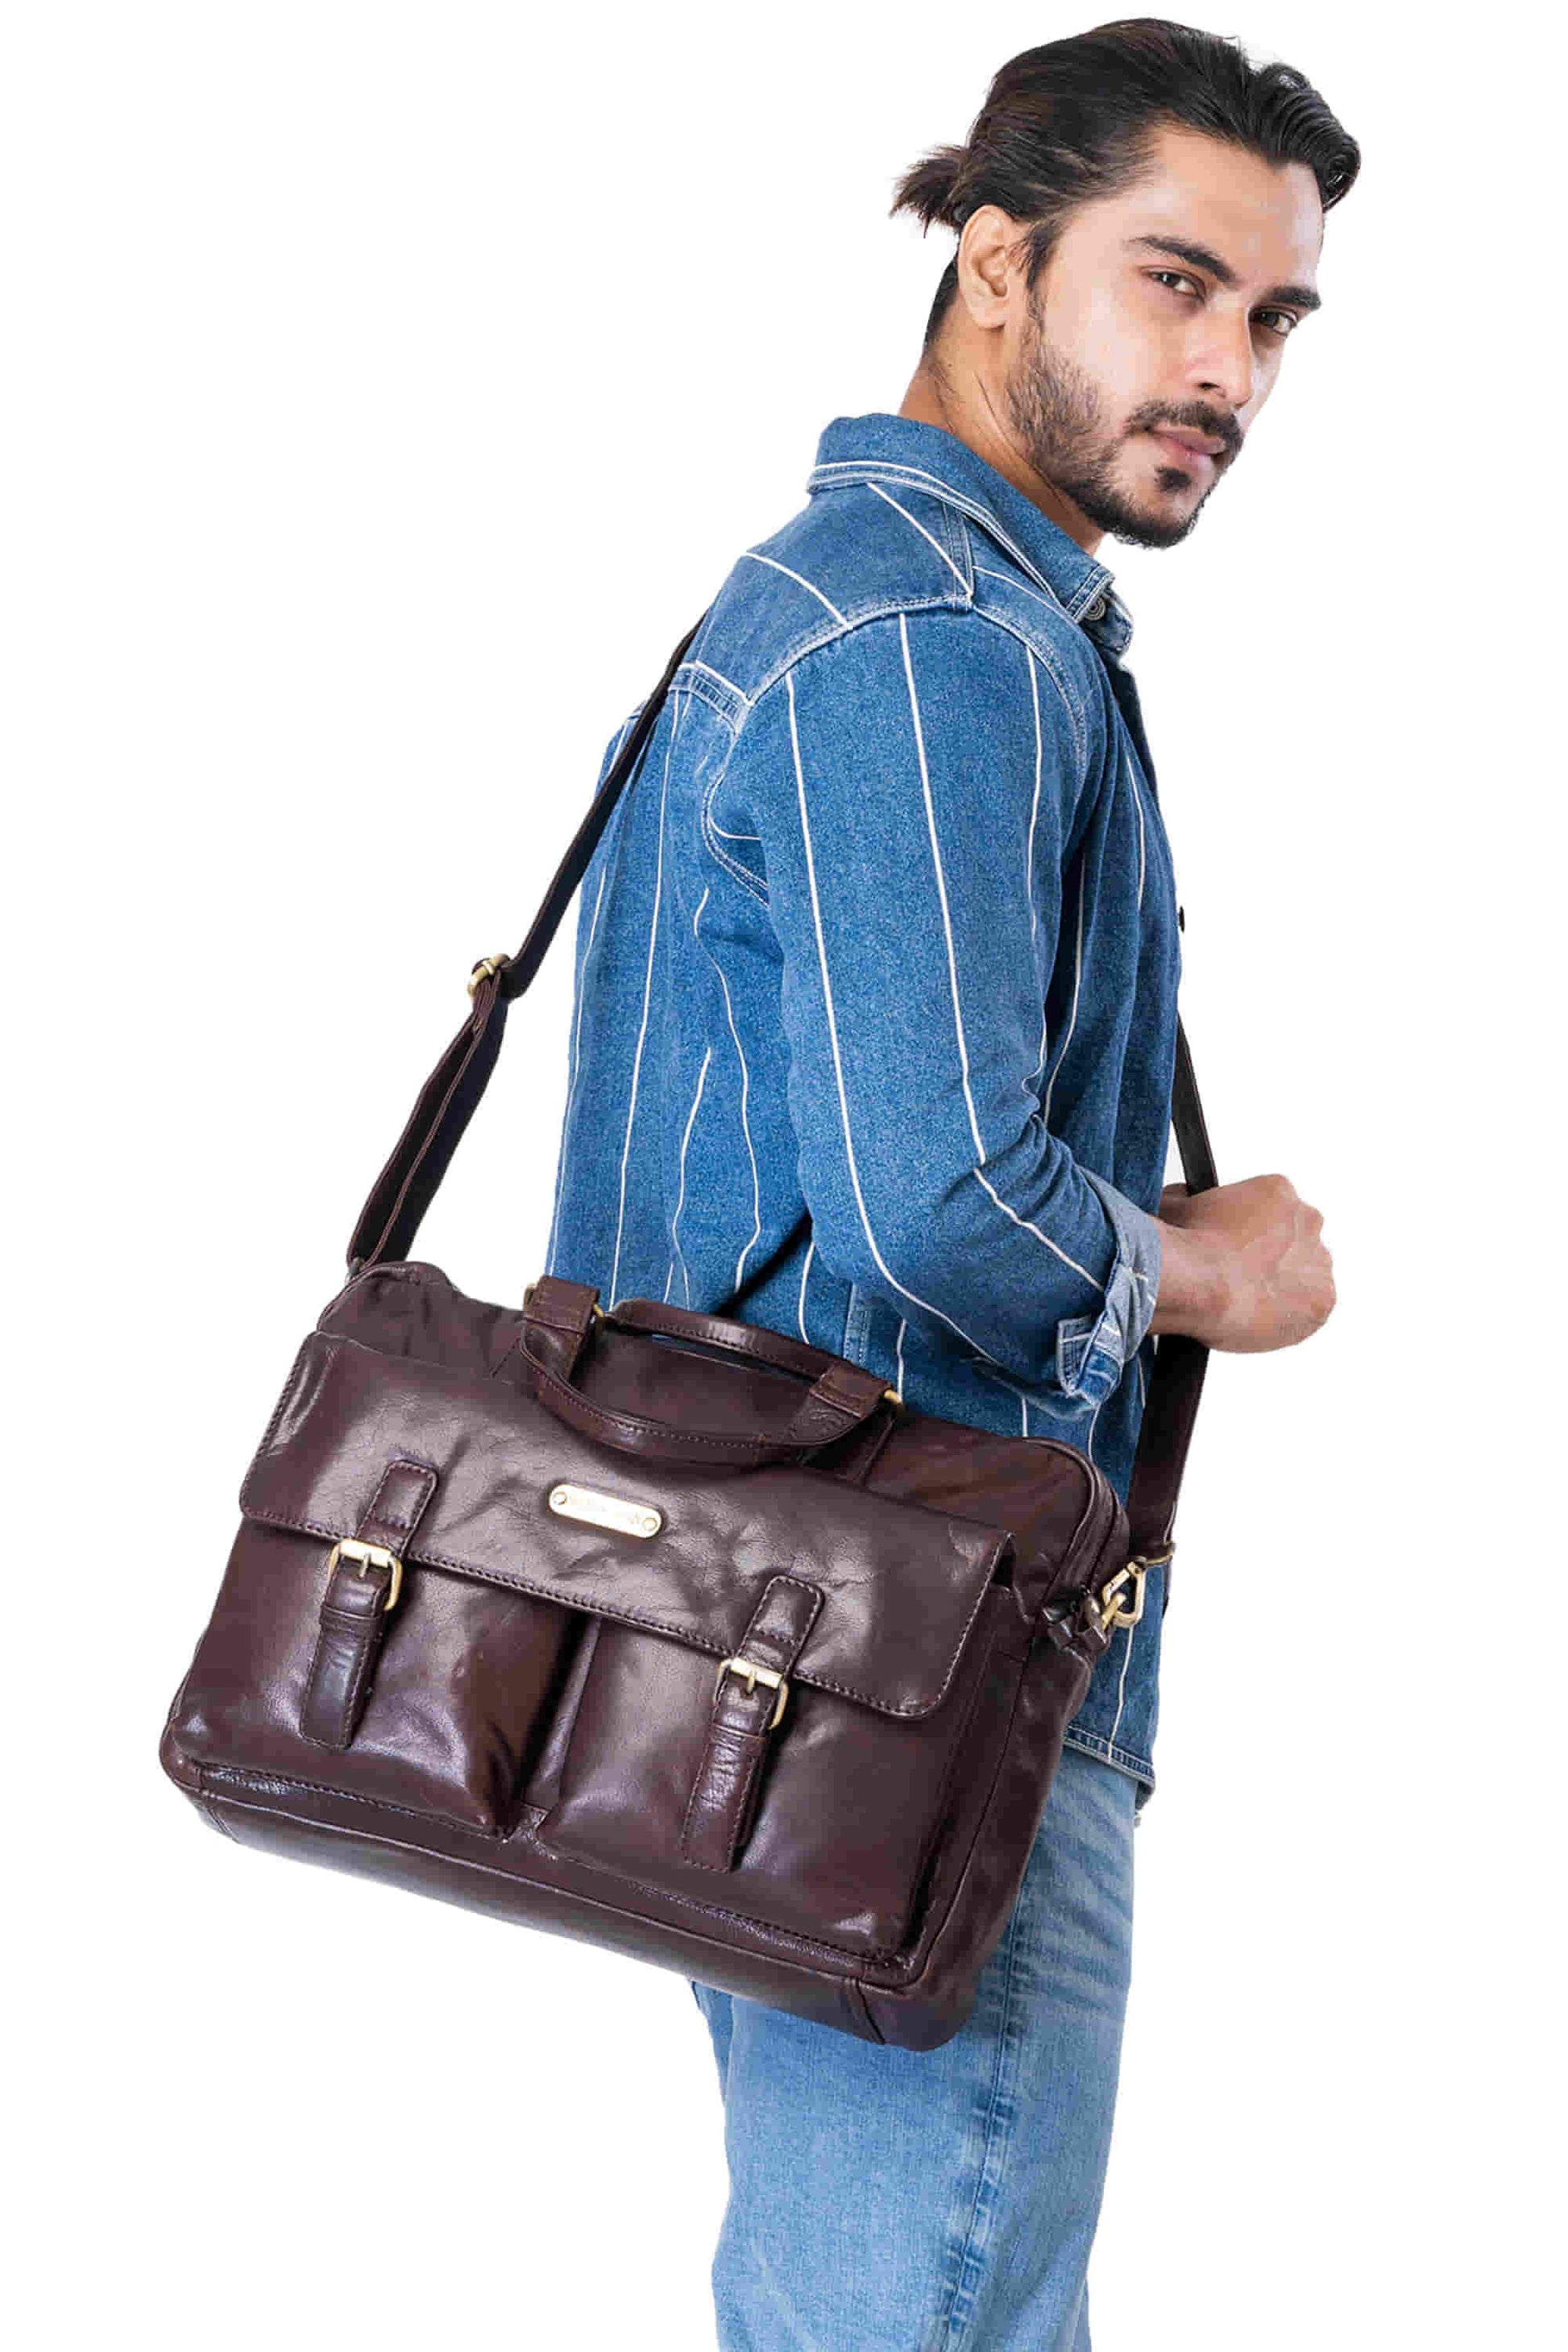 Style n Craft 392500 Cross Body Messenger Bag in Full Grain Dark Brown Vintage Leather - in use as a cross body shoulder bag on the side